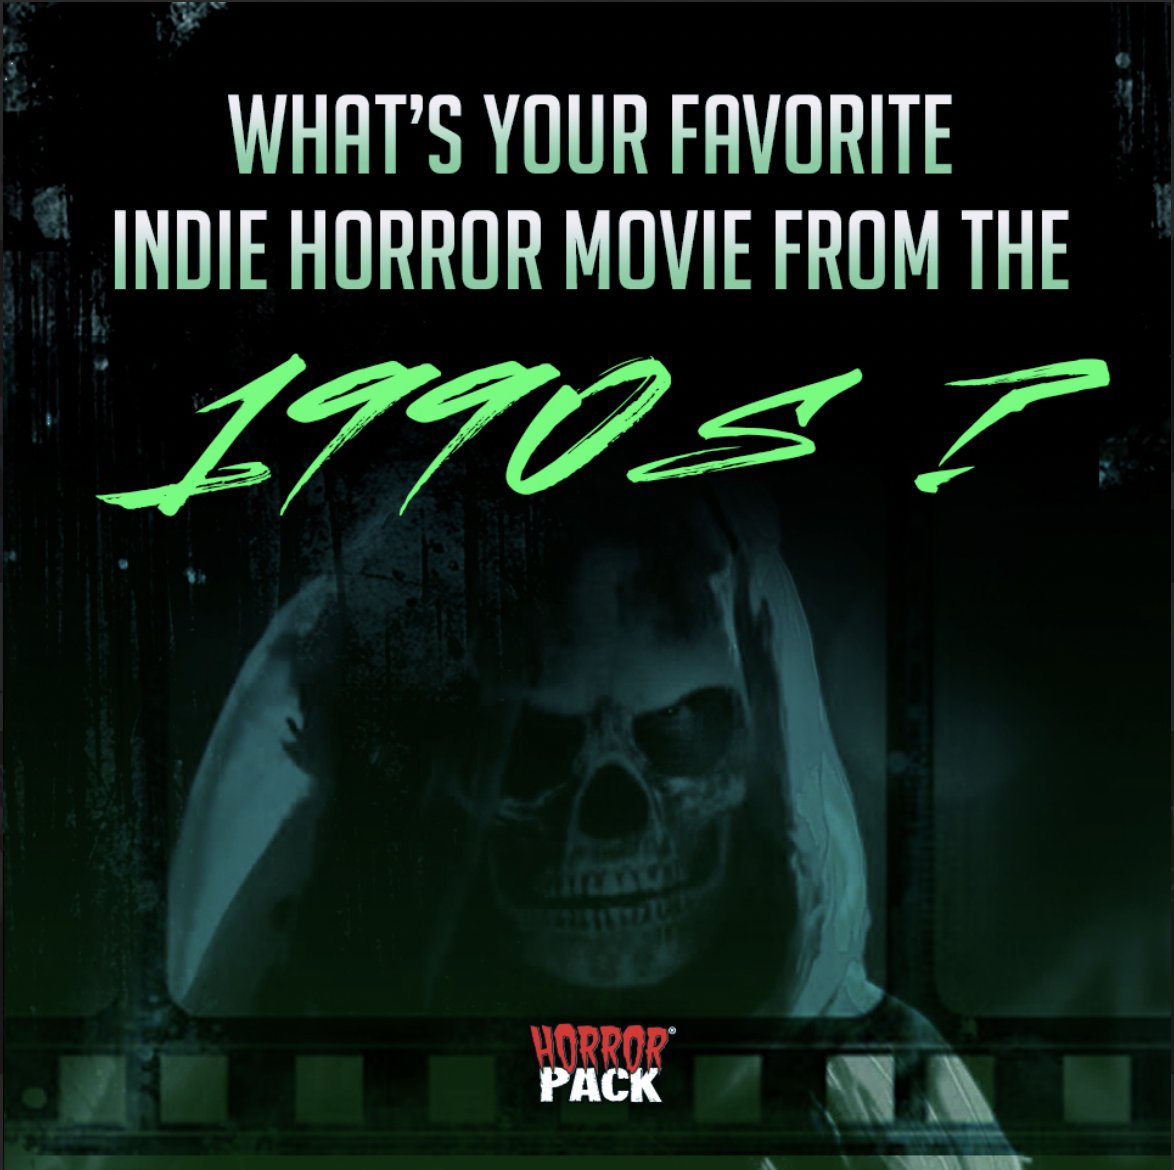 What's your favorite indie horror movie from the 1990s??